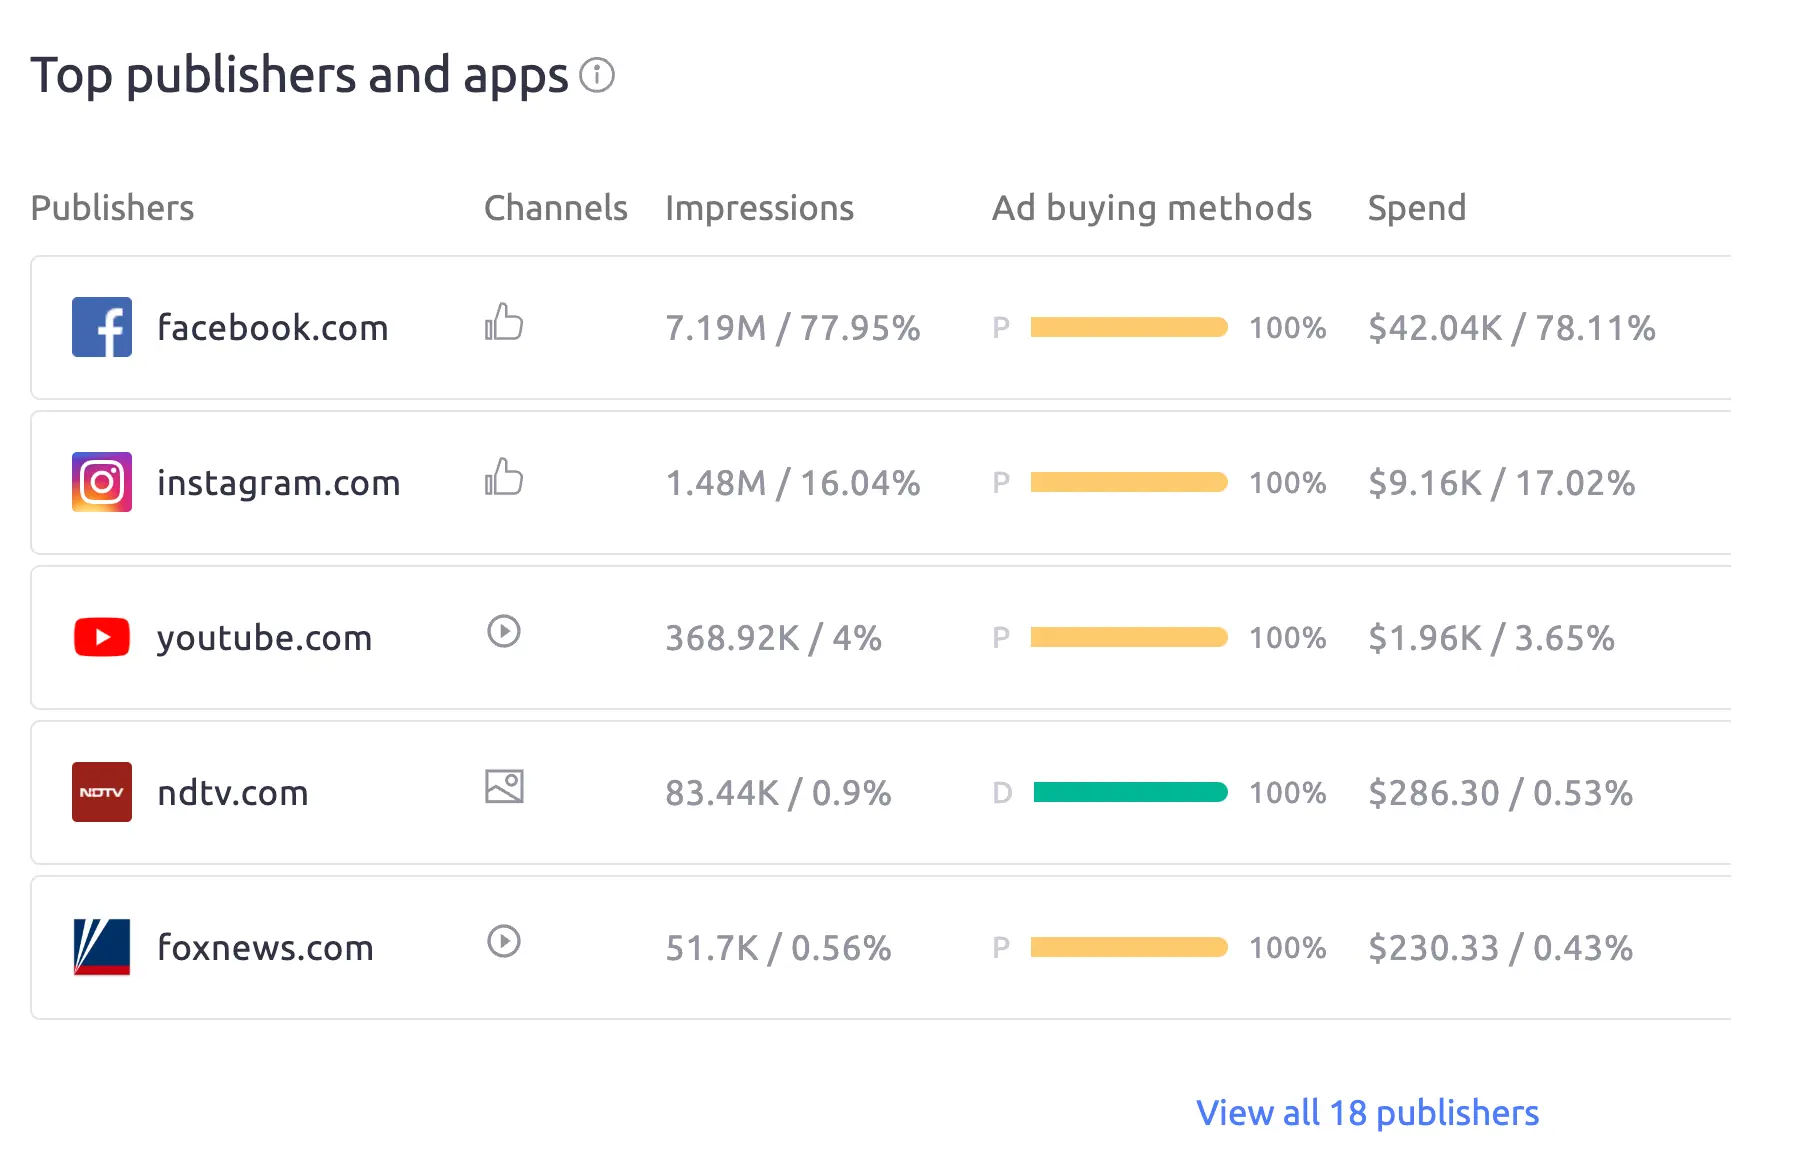 Find Top Publishers and Apps